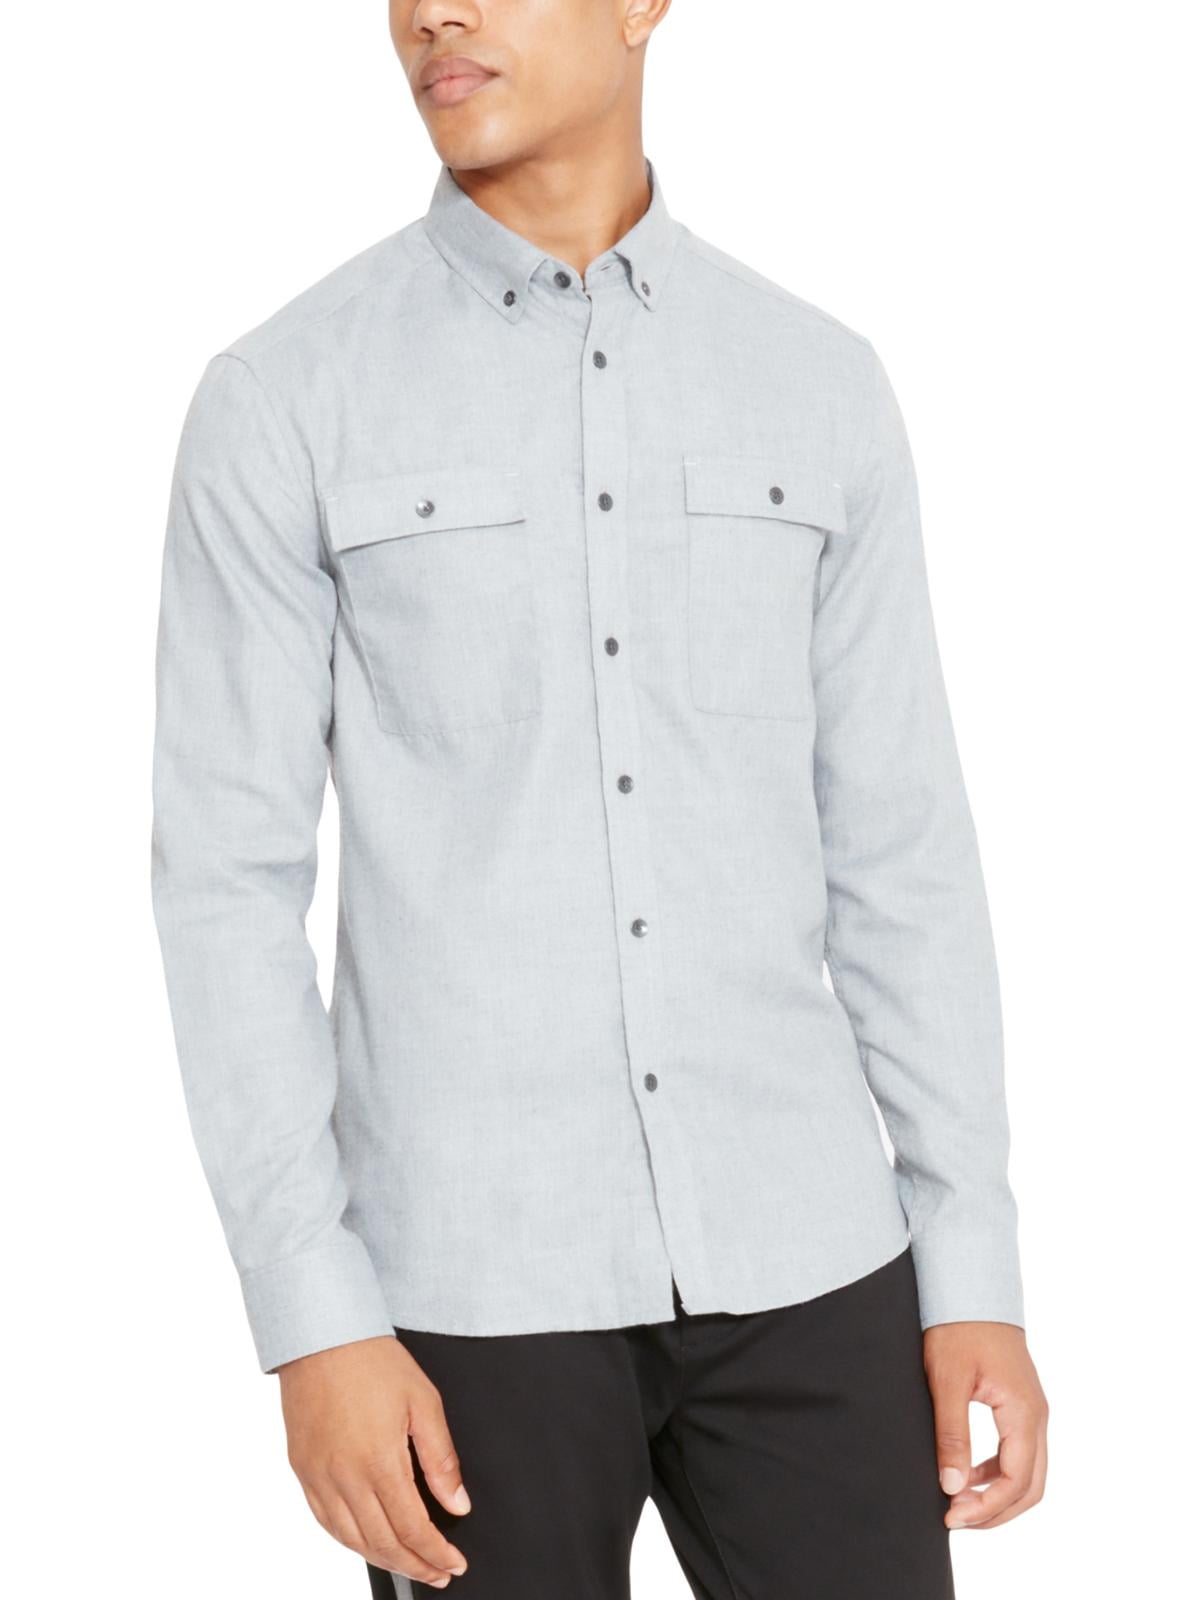 Kenneth Cole Reaction Mens Performance Woven Flannel Button-Down Shirt ...